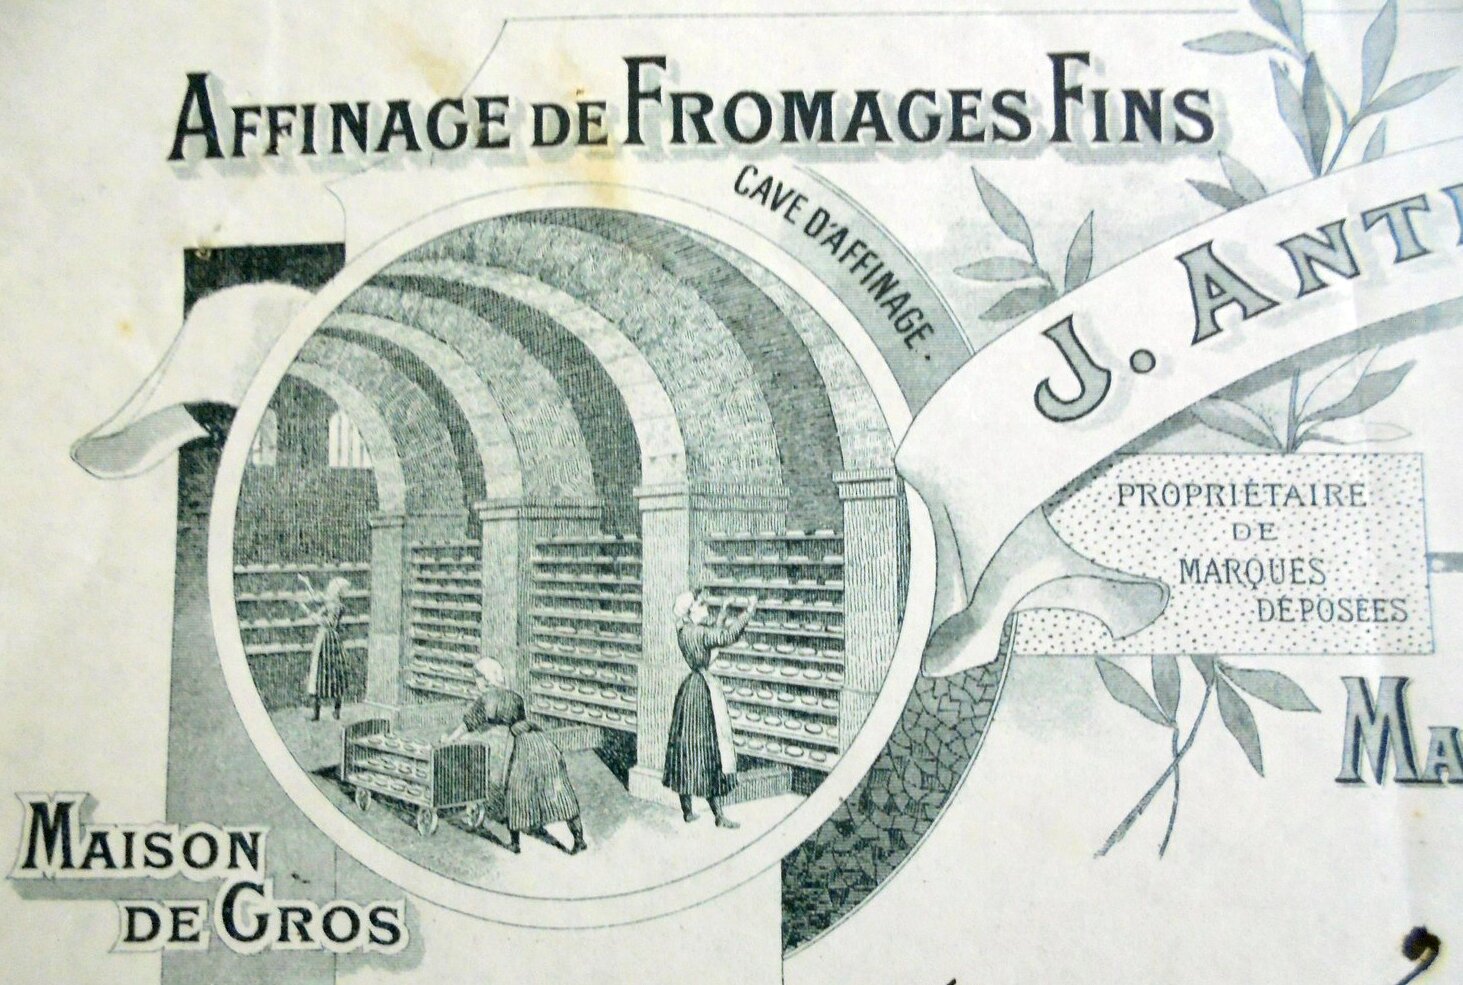 20-24 rue Thubaneau, cave d’affinage de fromages fins Romuald Giraud